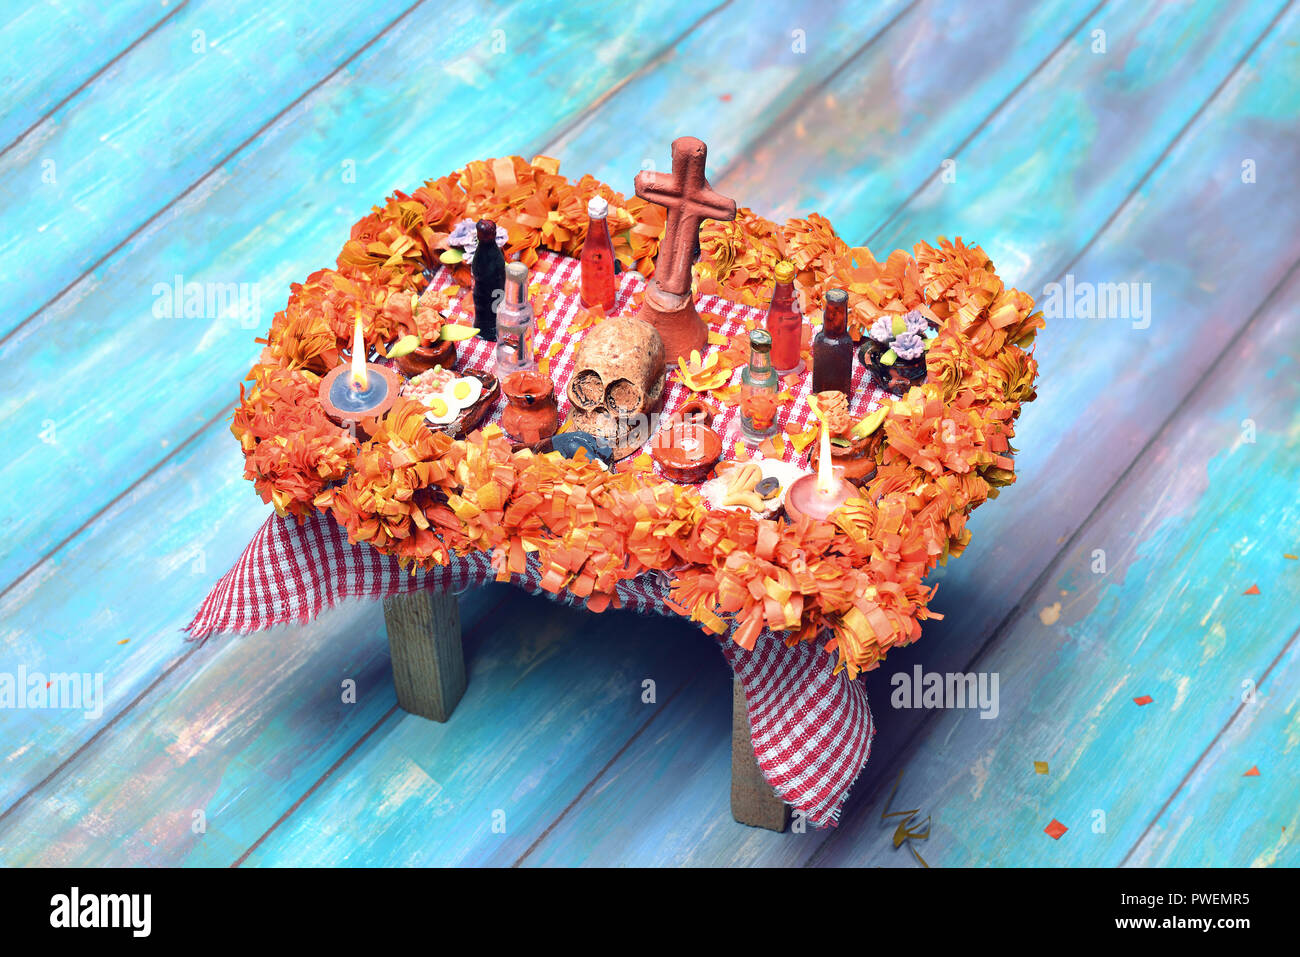 Mexican Day of the dead altar with skull, pan de muerto, drinks, cempasuchil flowers and candles Stock Photo